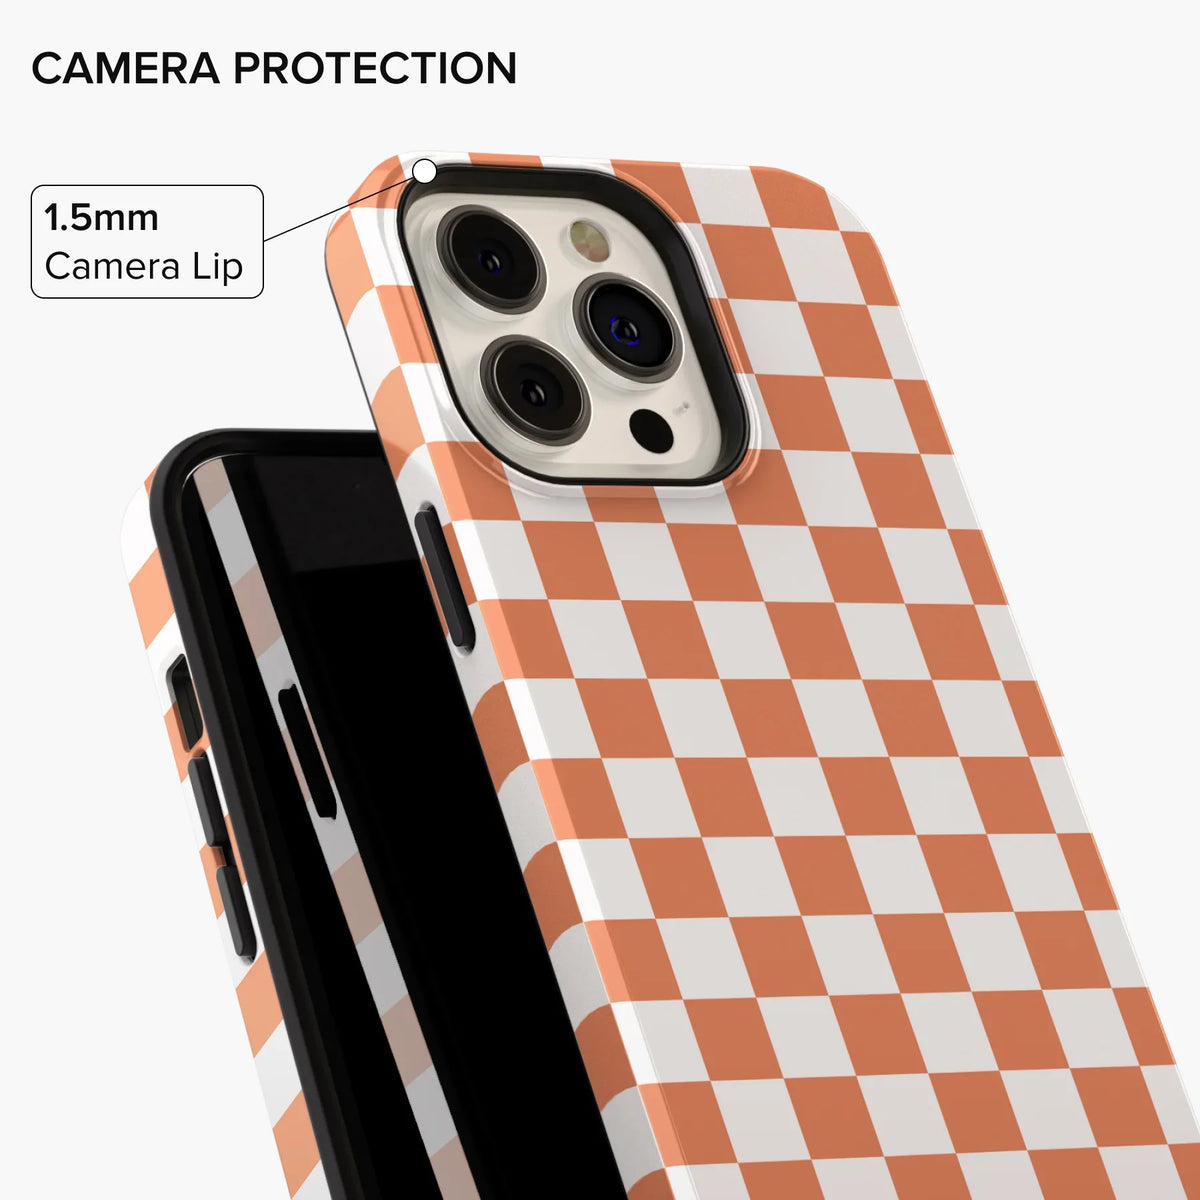 Peach Checkerboard iPhone Case - iPhone 13 Pro Max Cases